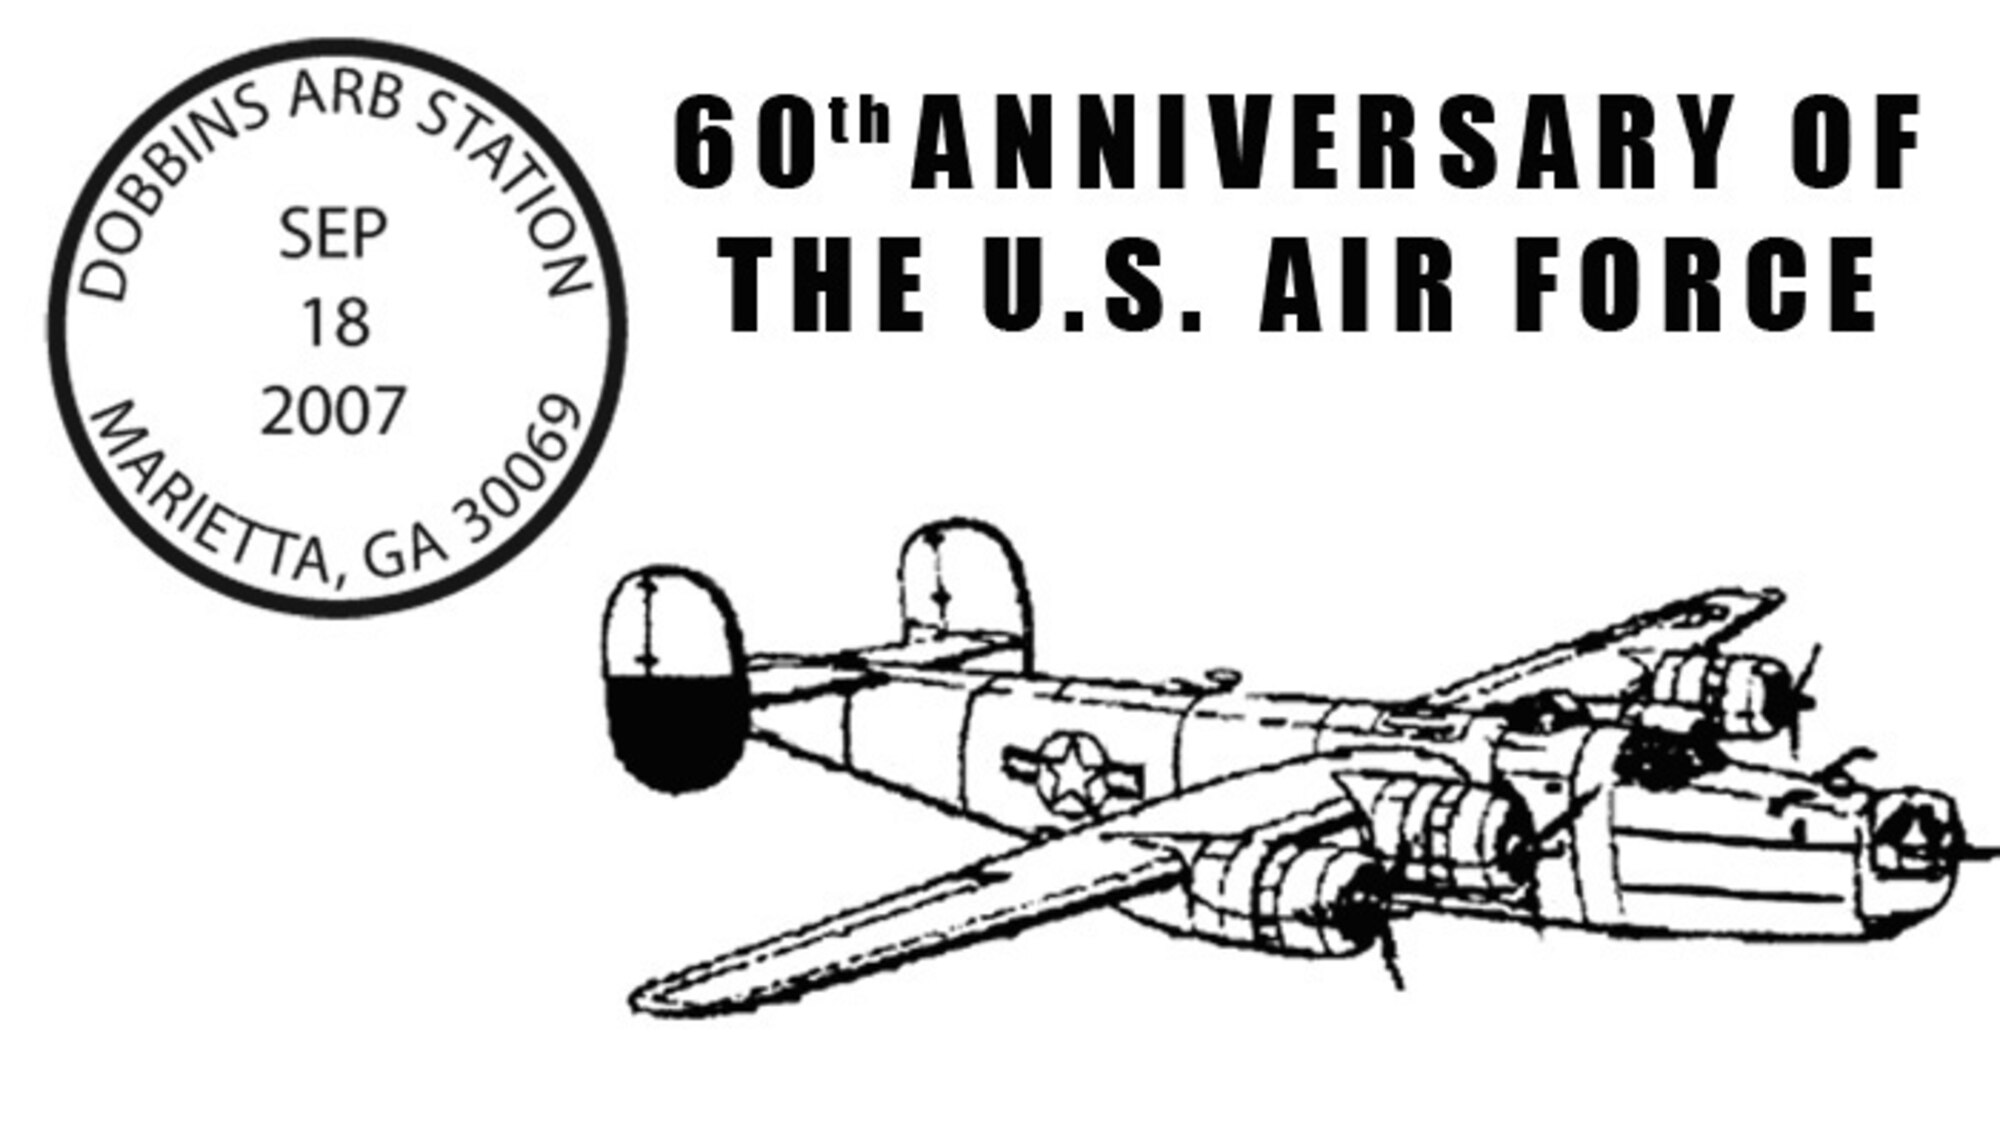 The U.S. Postal Service and the 94th Airlift Wing will honor the Air Force with a  60th Anniversary of the Air Force Postmark from Sept. 18 to Oct. 18 at Marietta, Ga. (Courtesy graphic) 